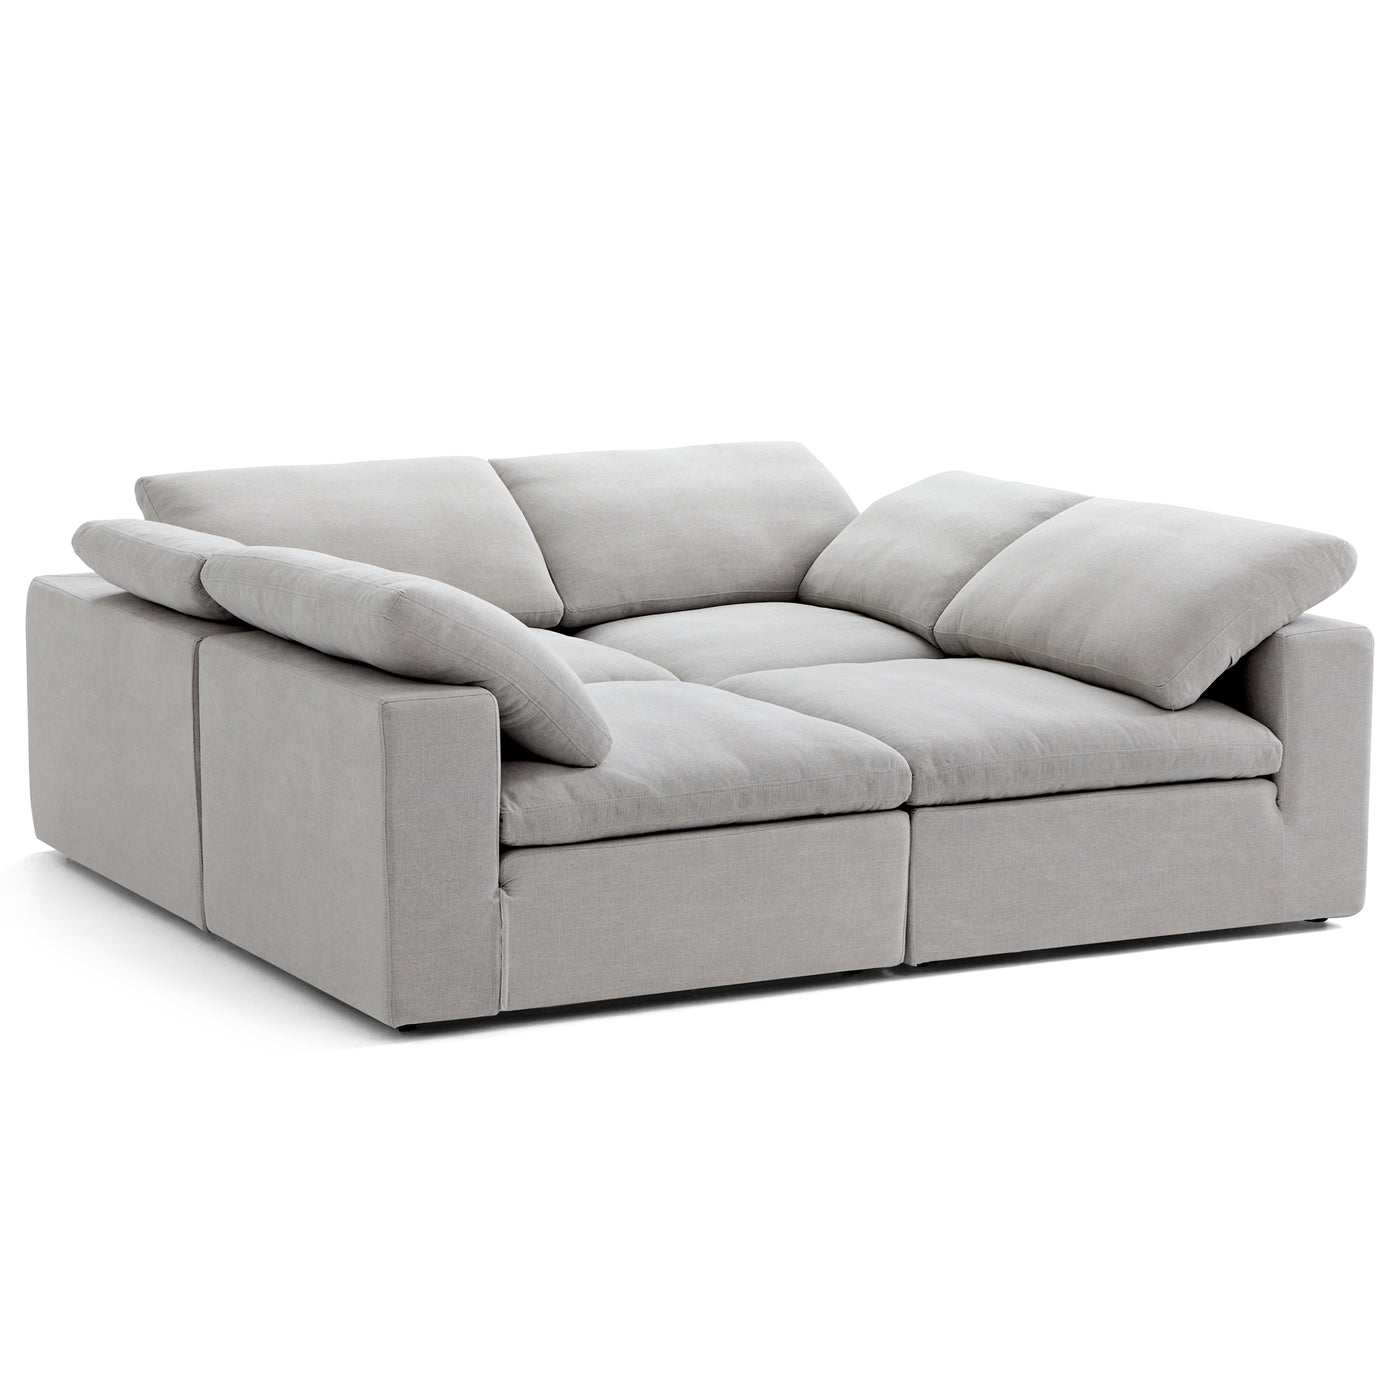 Tender Wabi Sabi Sand U Shaped Sectional with Open Ends-Gray-90.6"